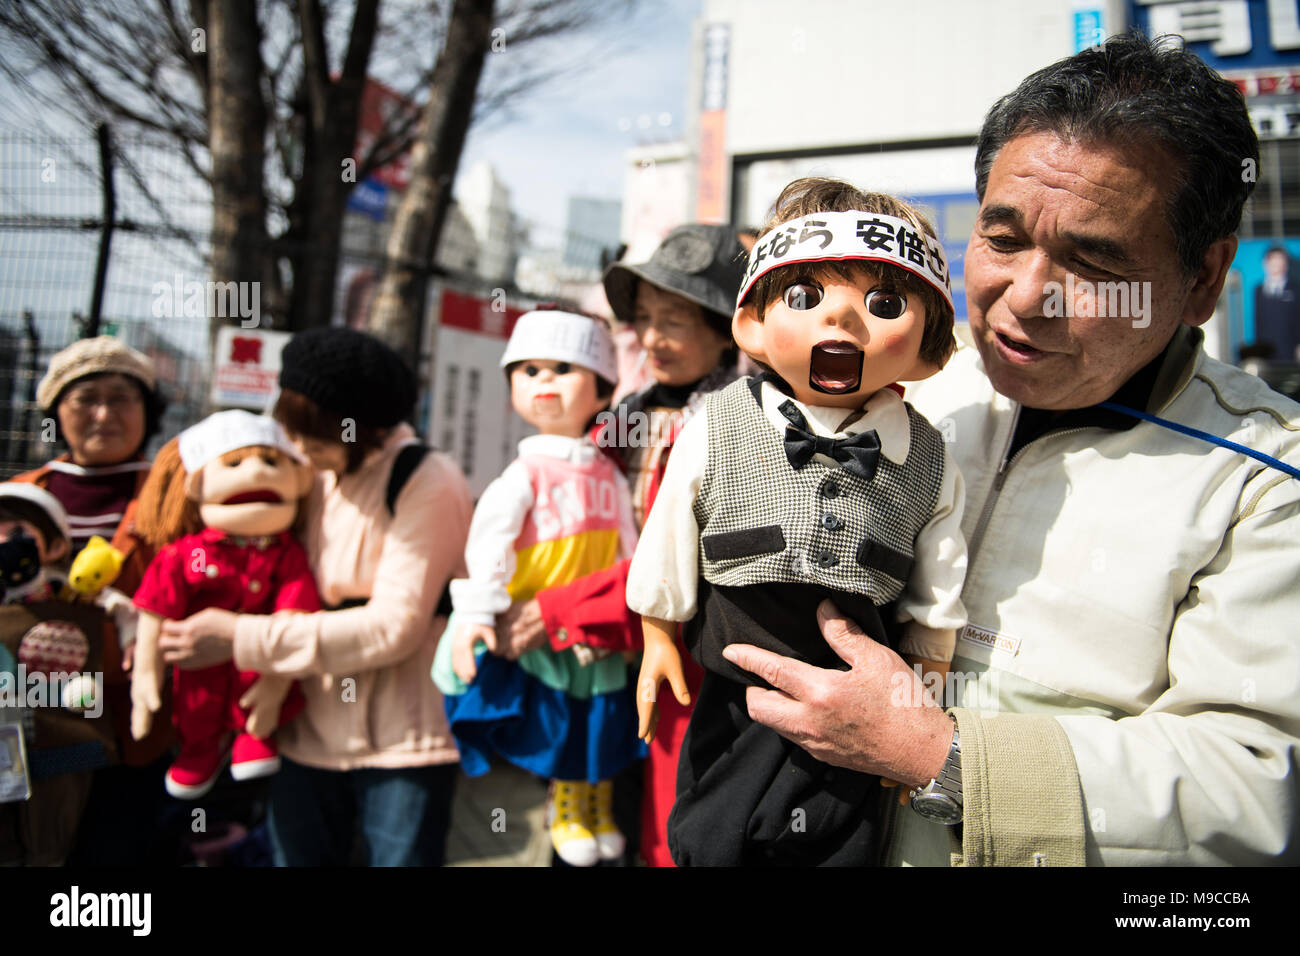 TOKYO, JAPAN - MARCH 24 : A group of puppet doll owners stage a rally to protest against the U.S base presence in Japan on March 24, 2018 in Tokyo, Japan. The protests are part of wider demonstrations on the island against the government plans to go ahead with the relocation of the US Marine Corps Air Station Futenma to the Henoko district of Nago, Okinawa Prefecture. (Photo: Richard A. de Guzman/AFLO) Stock Photo